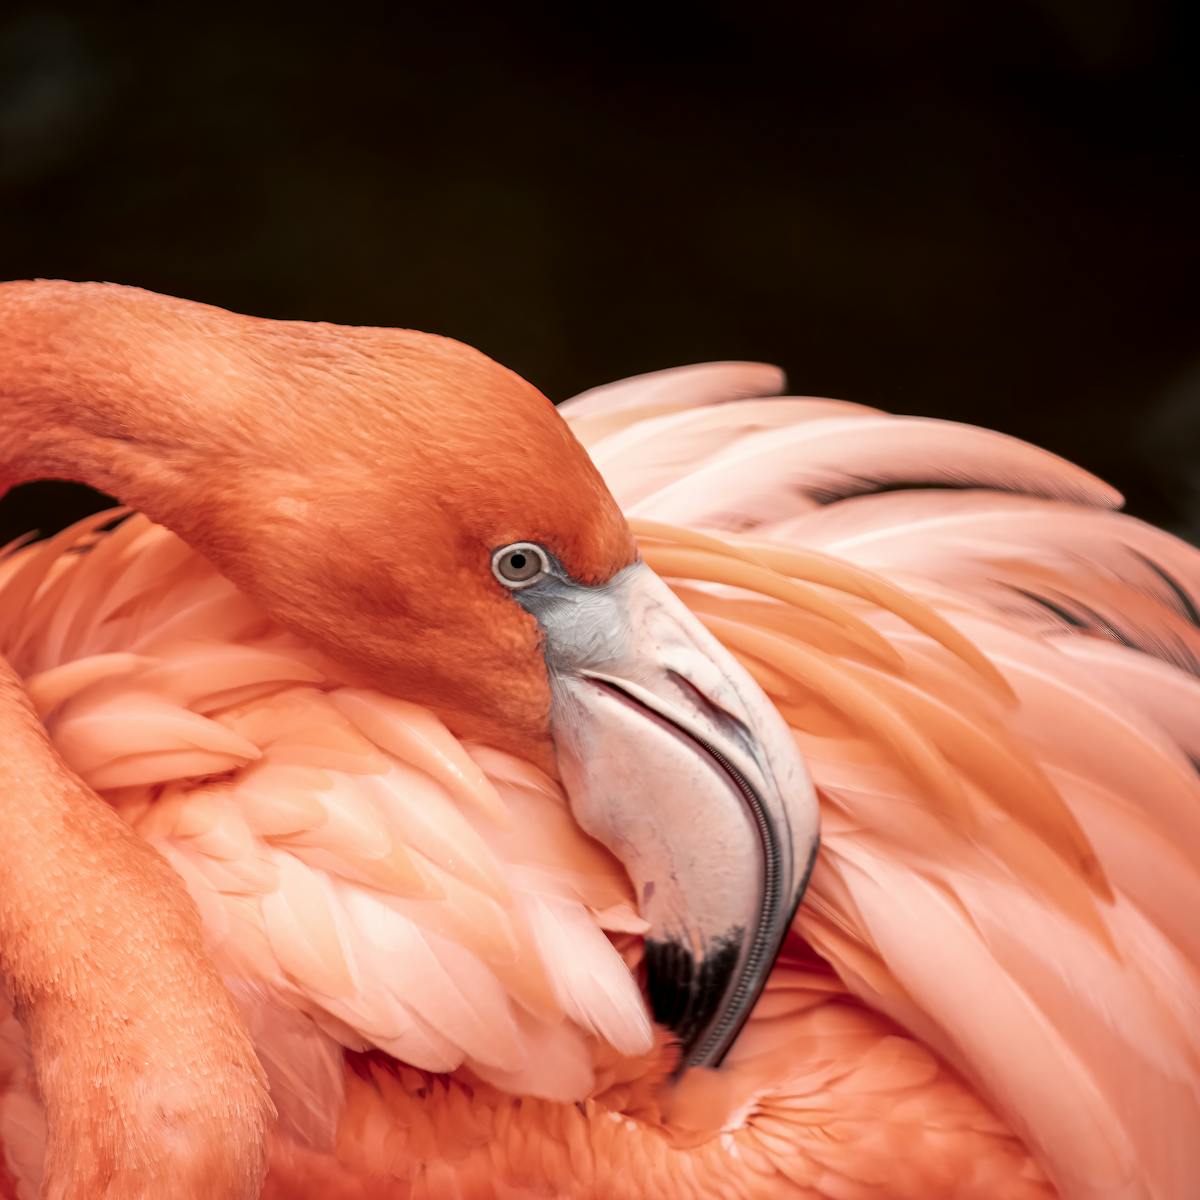 How we discovered flamingos form cliques, just like humans